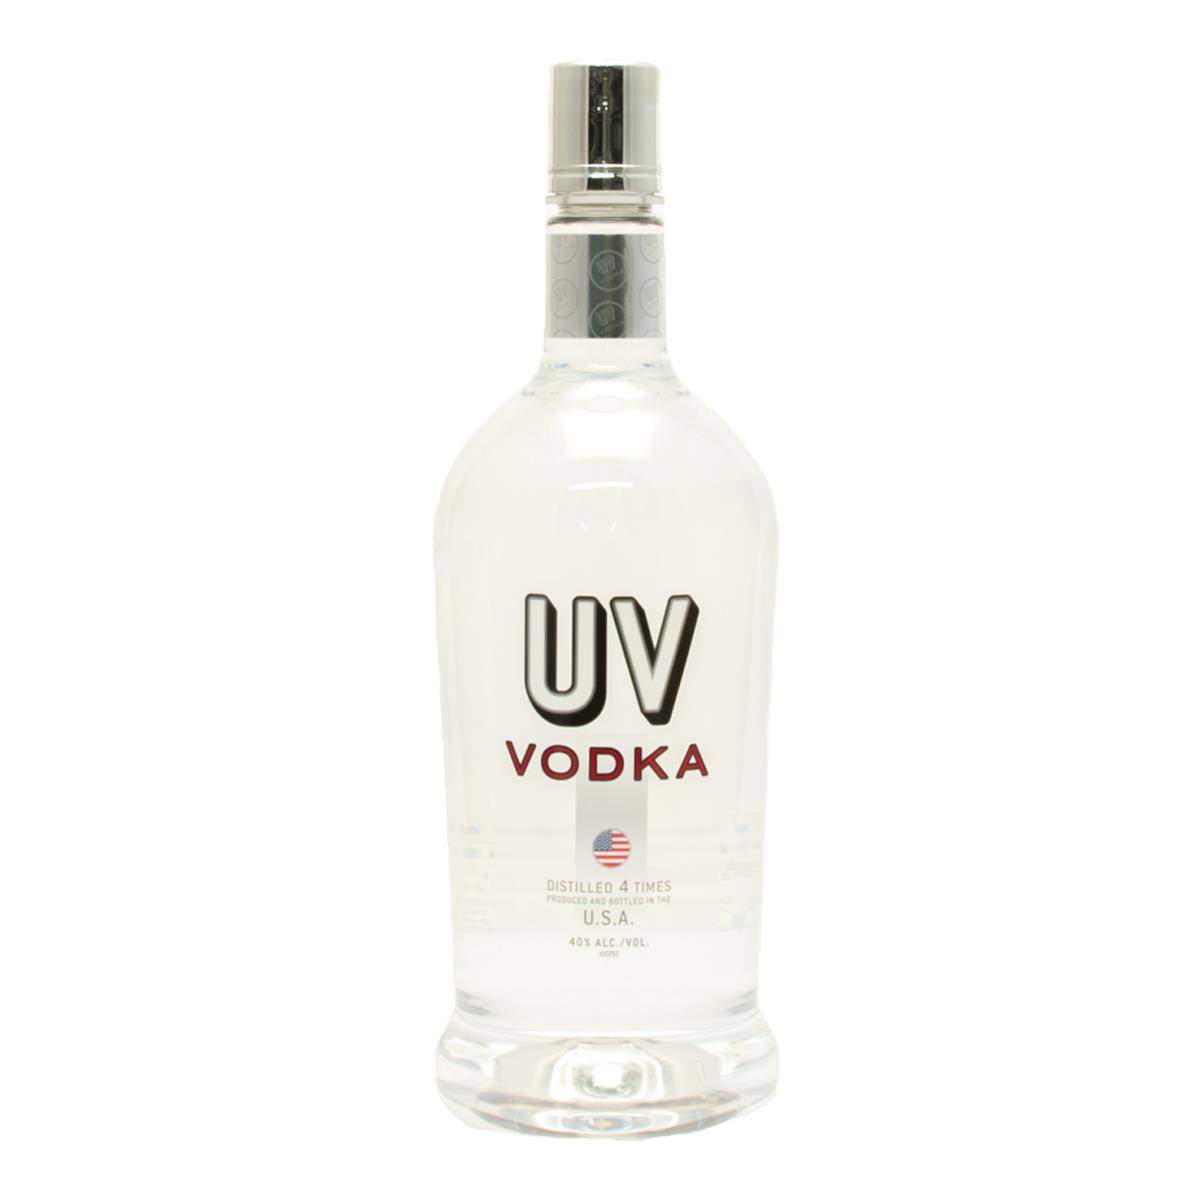 Uvvodka 1.75 Liter Cannot Be Translated Into A Computer Or Mobile Wallpaper Context As It Is A Product Of Alcoholic Beverage. Can You Provide A Different Sentence For Me To Translate? Wallpaper